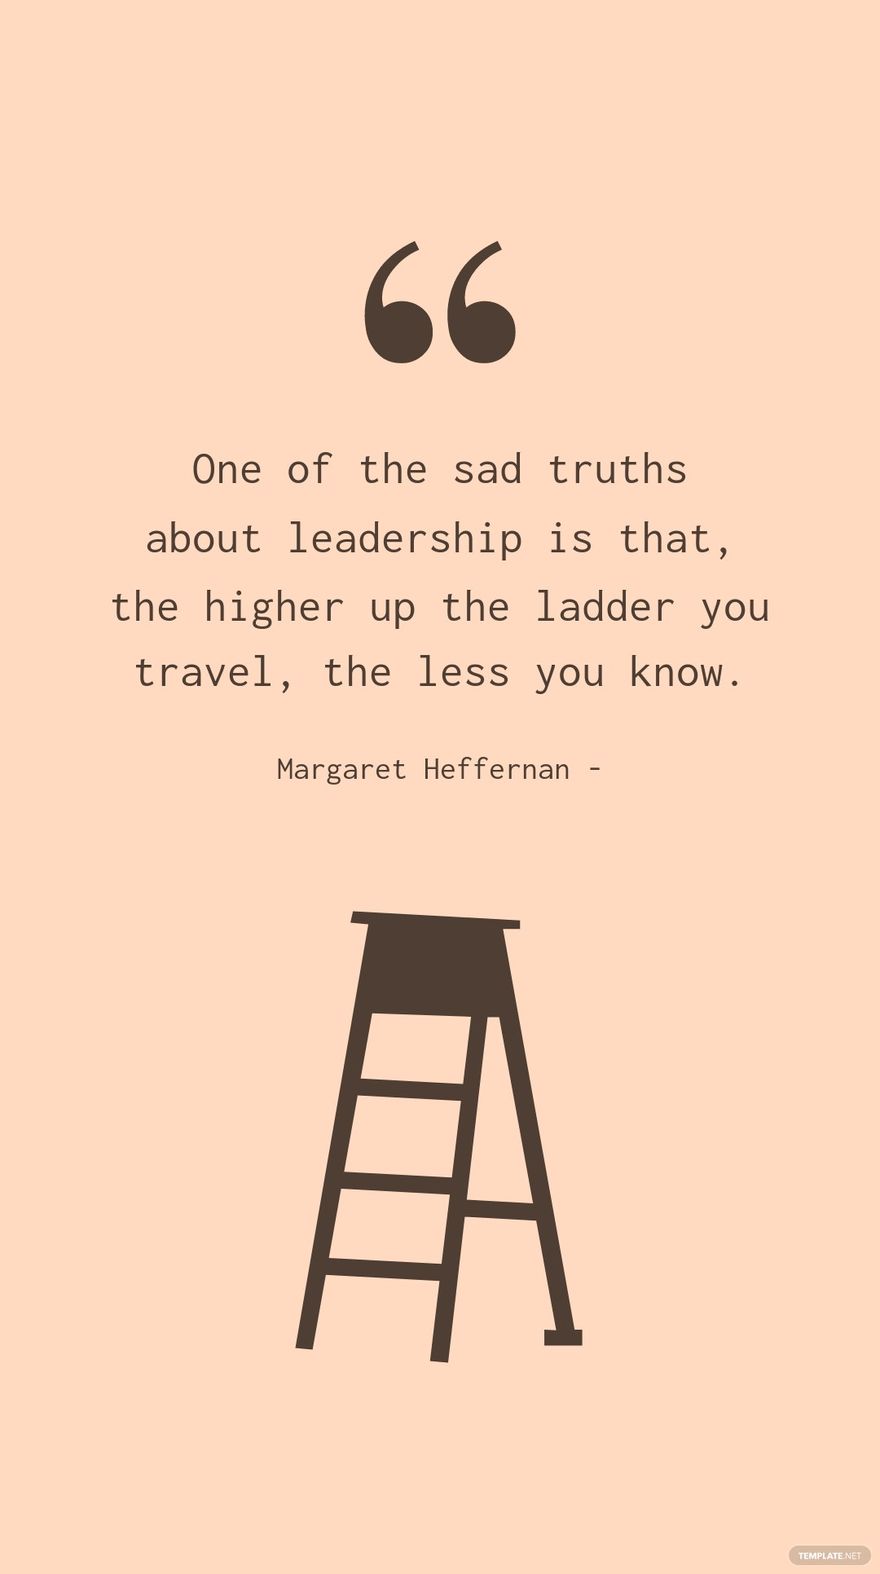 Margaret Heffernan - One of the sad truths about leadership is that, the higher up the ladder you travel, the less you know.